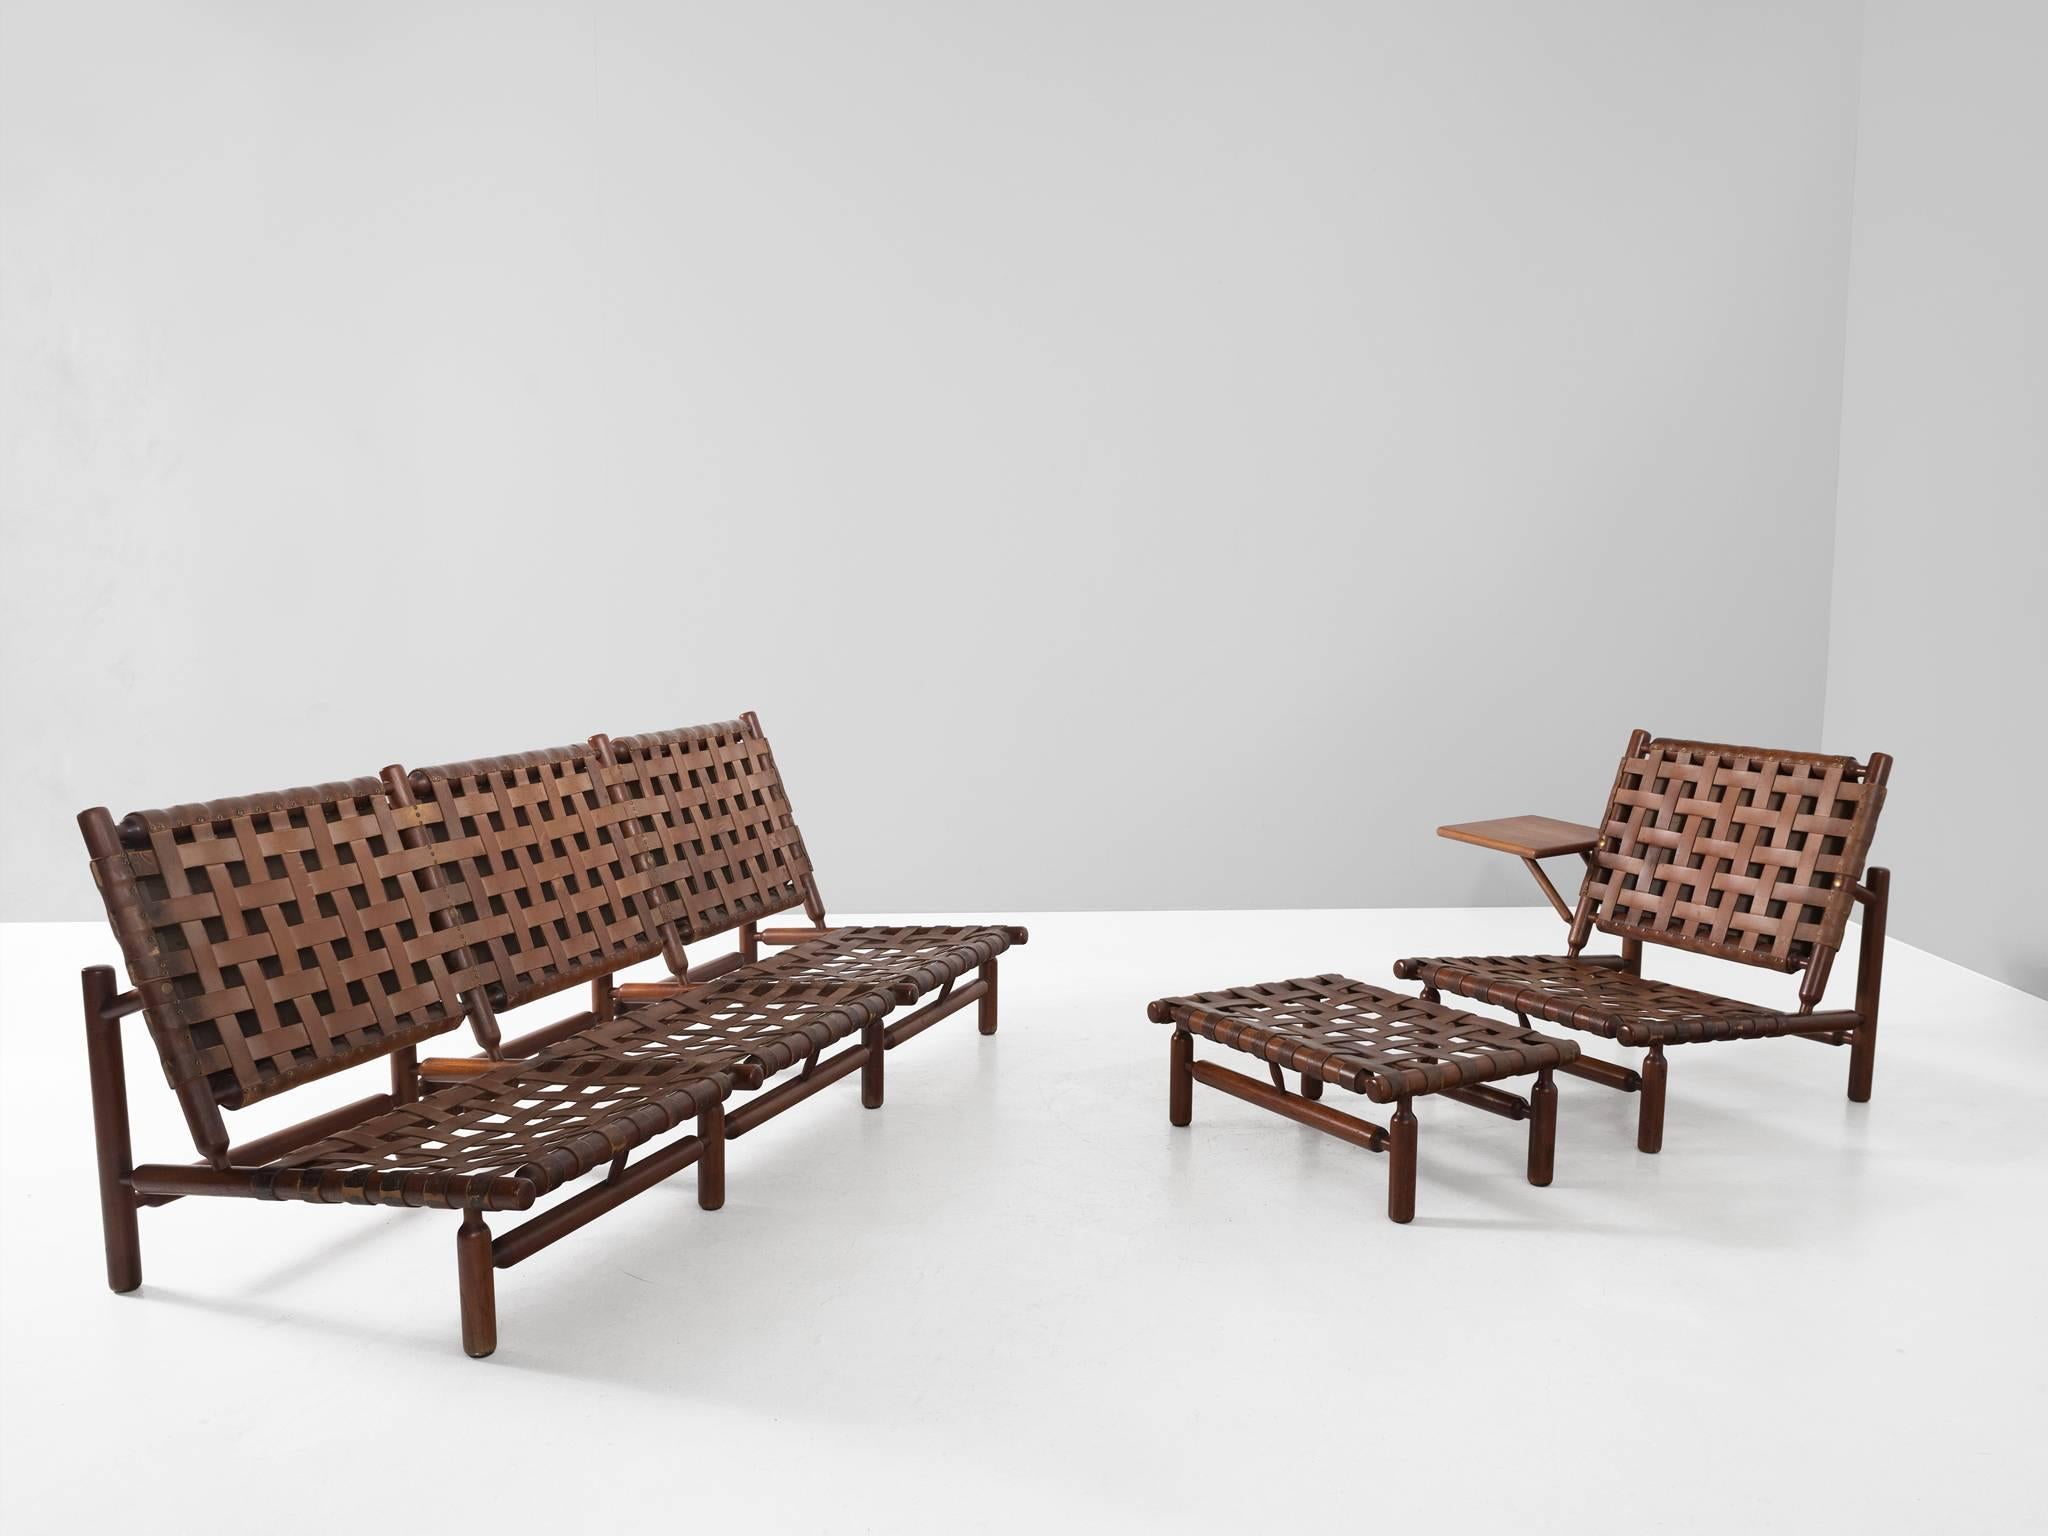 Sofa and lounge chair, in teak and leather, by Ilmari Tapiovaara for Esposizione La Permanente Mobili, Italy, 1957. 

Rare three-seat sofa and lounge chair by Finnish designer Ilmari Tapiovaara. This organic design features beautiful leather support